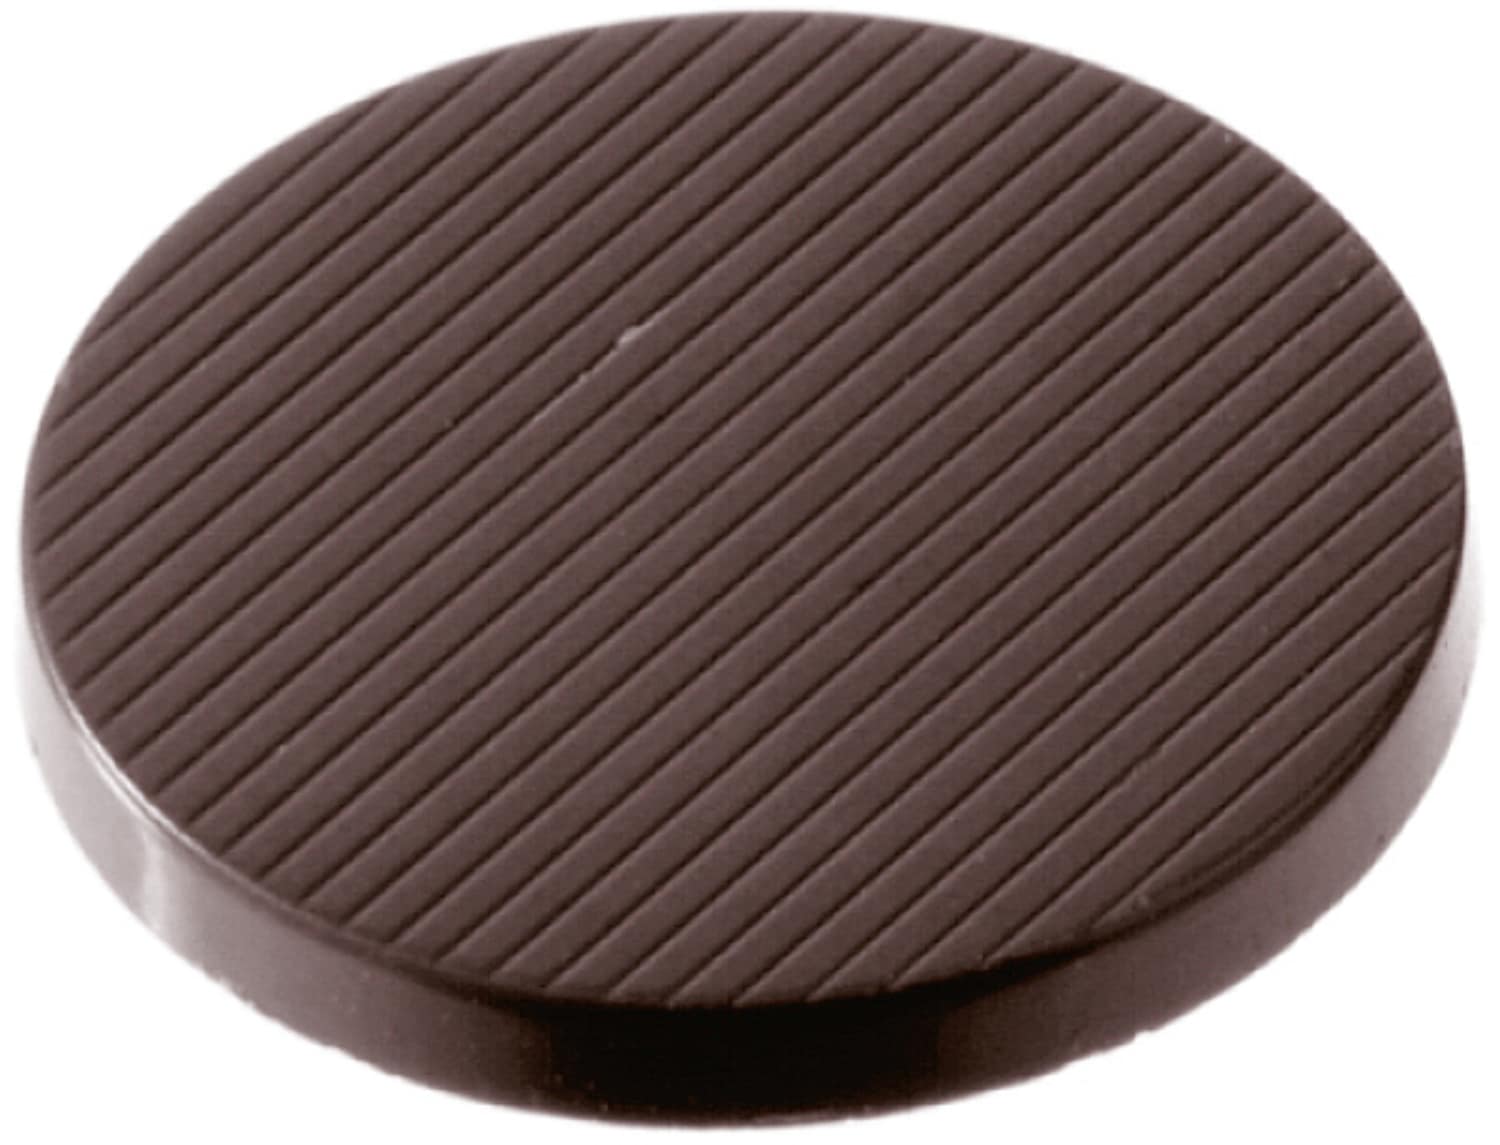 Chocolate mould "Biscuit" 422054